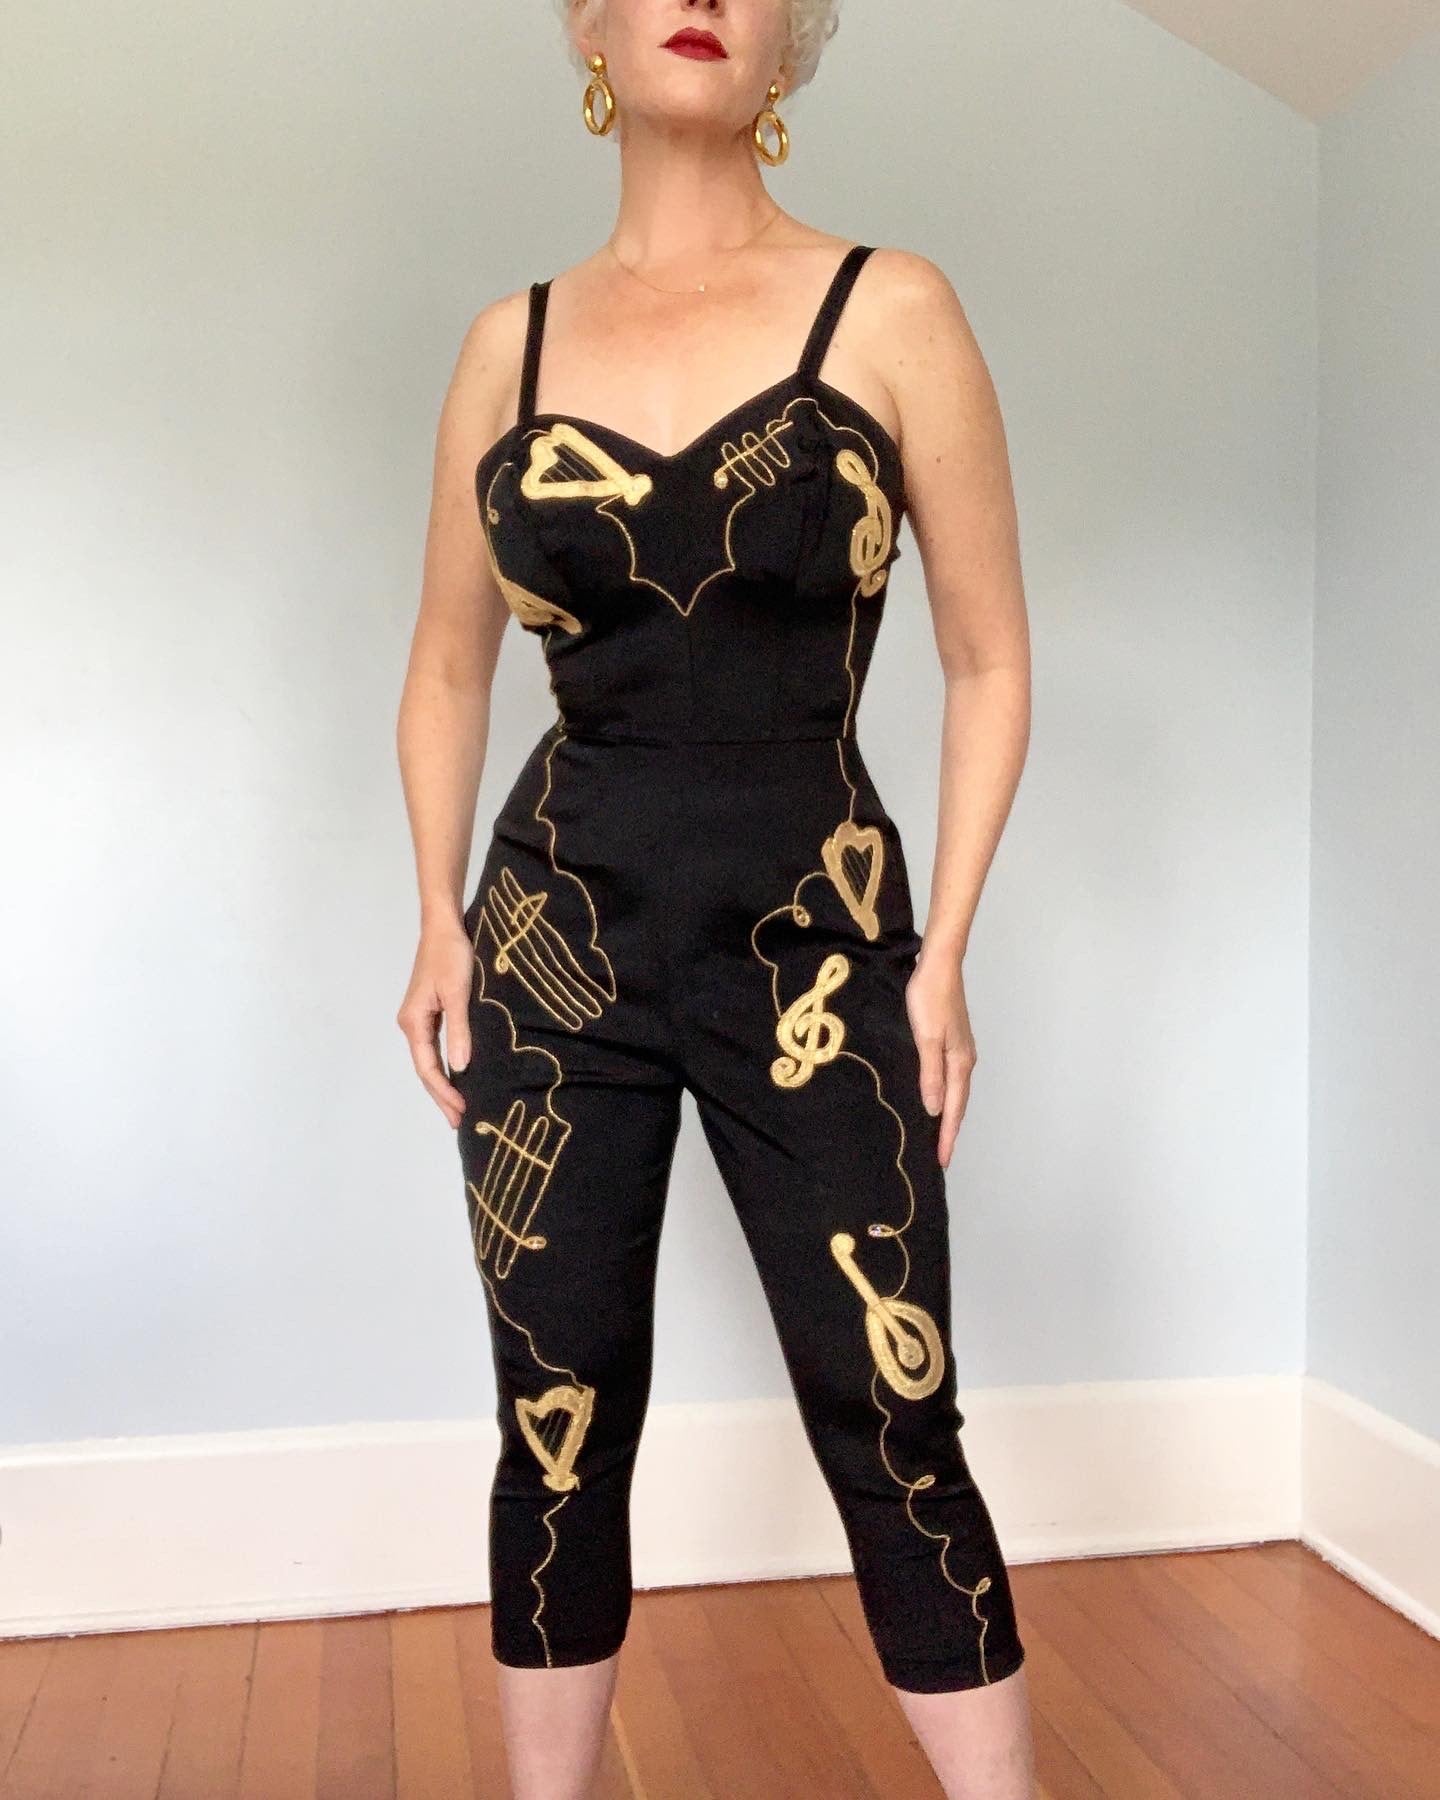 Rare 1950s "Ceeb of Miami" Musical Rock n' Roll Jumpsuit